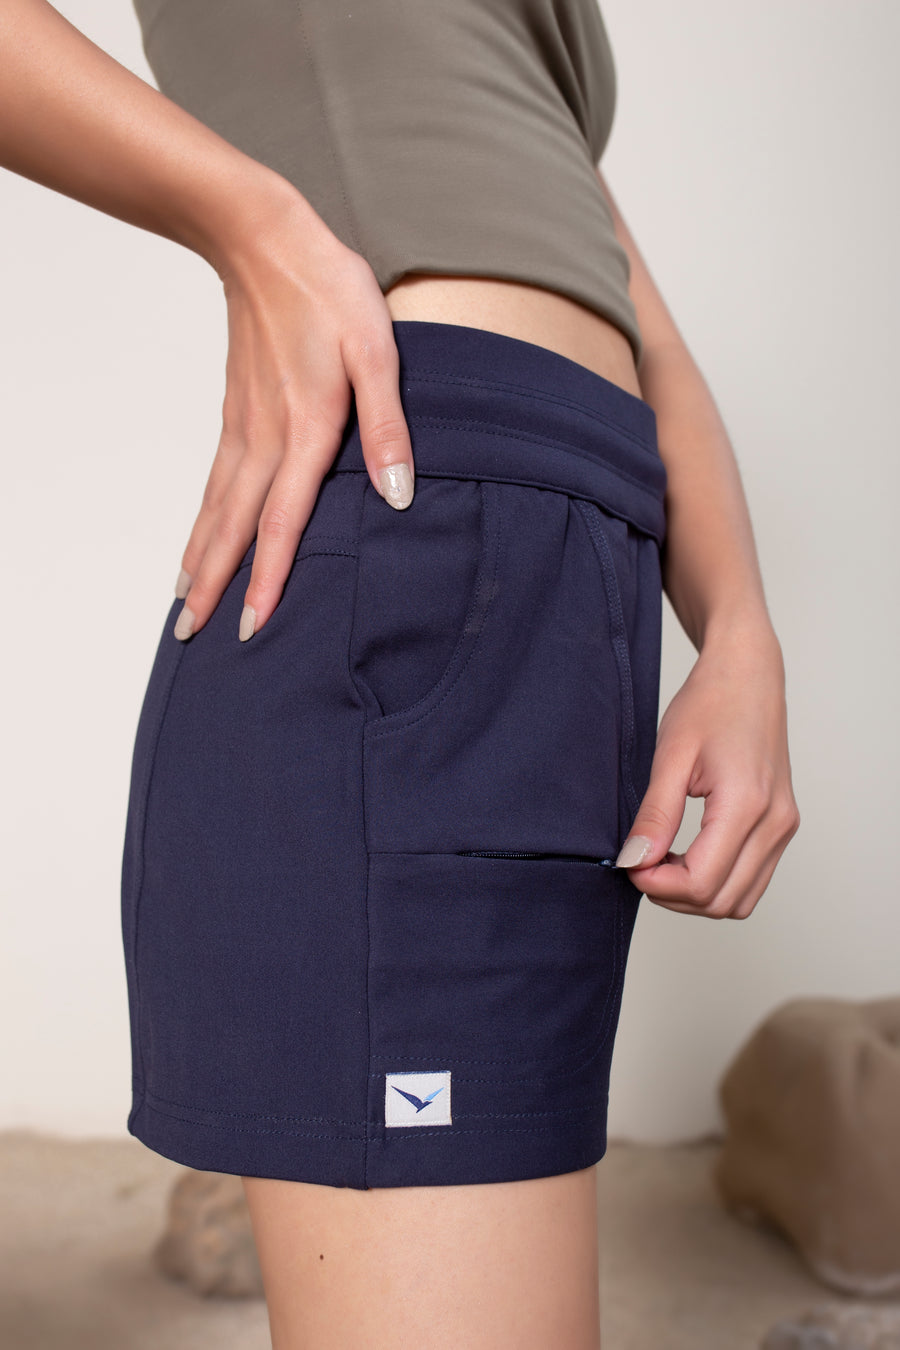 Women's Terra Shorts Navy | VOLO Apparel | A blend of technology, function, and style. The Terra shorts are designed and ready for every active opportunity that comes your way. Your first women's shorts with deep pockets, a snap button smart phone pocket, a zippered key pocket, and a hidden zippered back pocket.  High waisted, great for climbing, yoga, training, running and chilling.